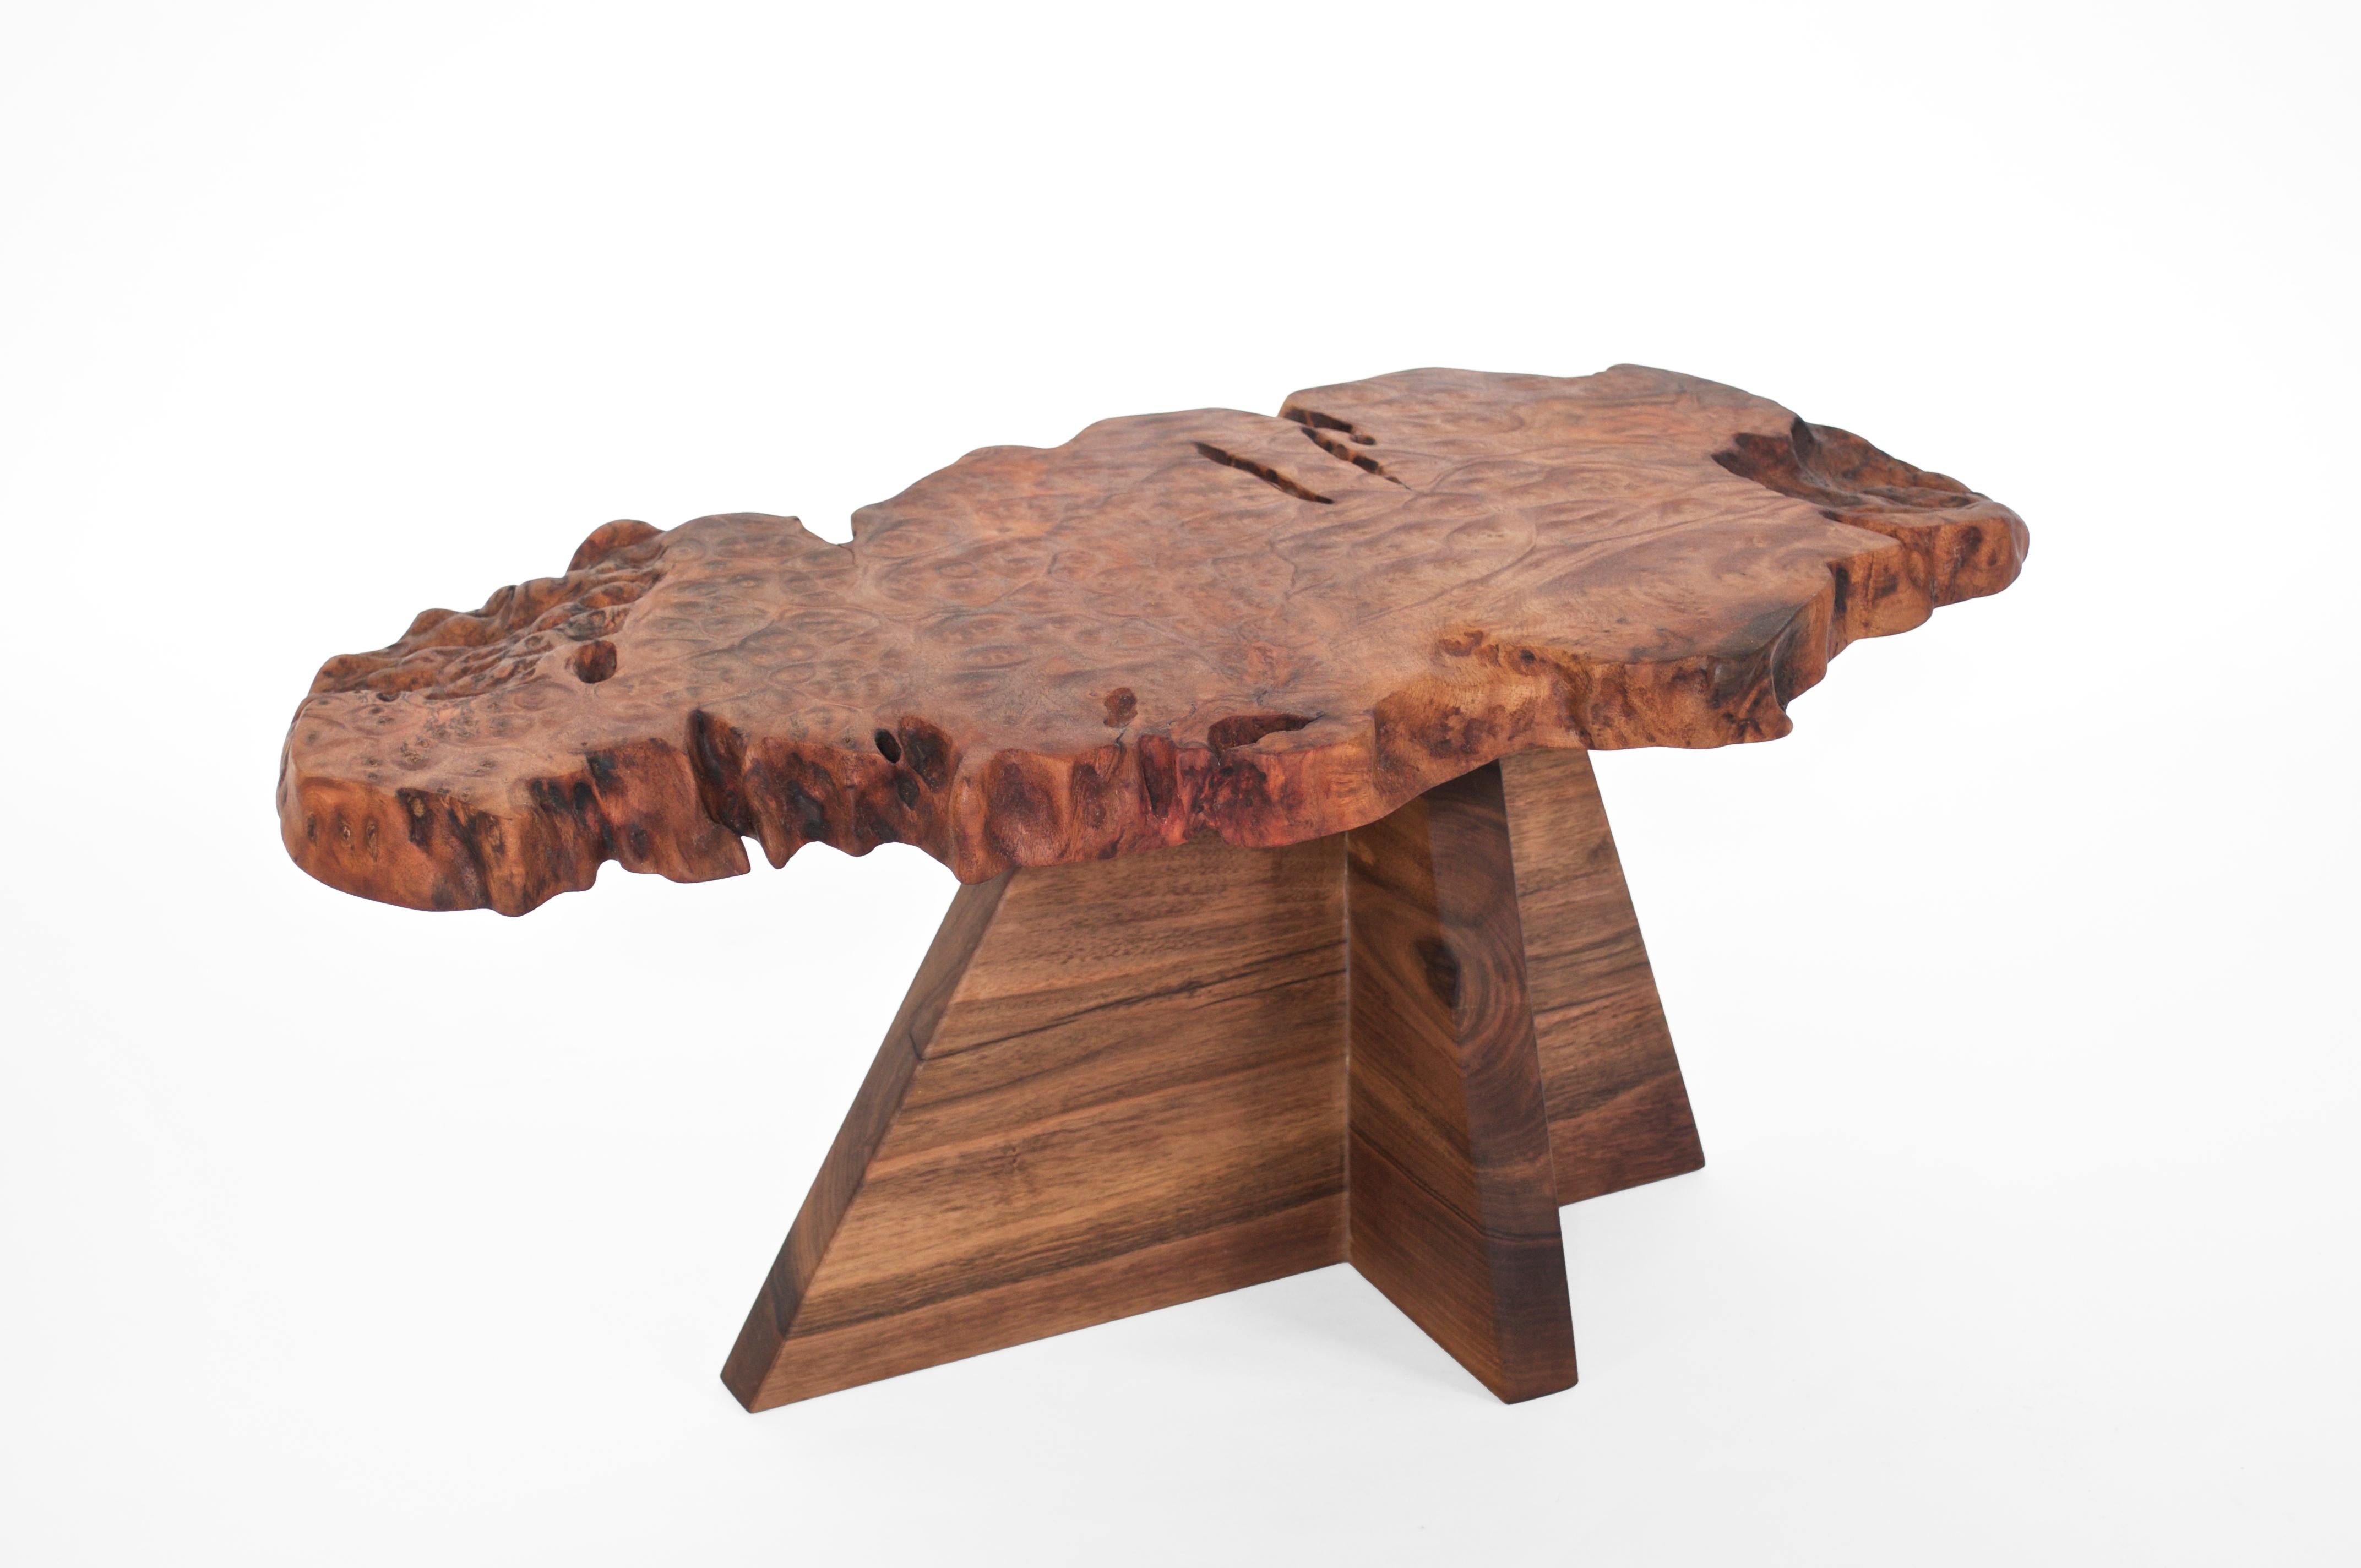 Unique walnut signed table by Jörg Pietschmann T2581 
Materials: Afzelia, Europe walnut, polished oil finish
Measures: H 37,5 x W 90 x D 47 cm 

In Pietschmann’s sculptures, trees that for centuries were part of a landscape and founded in